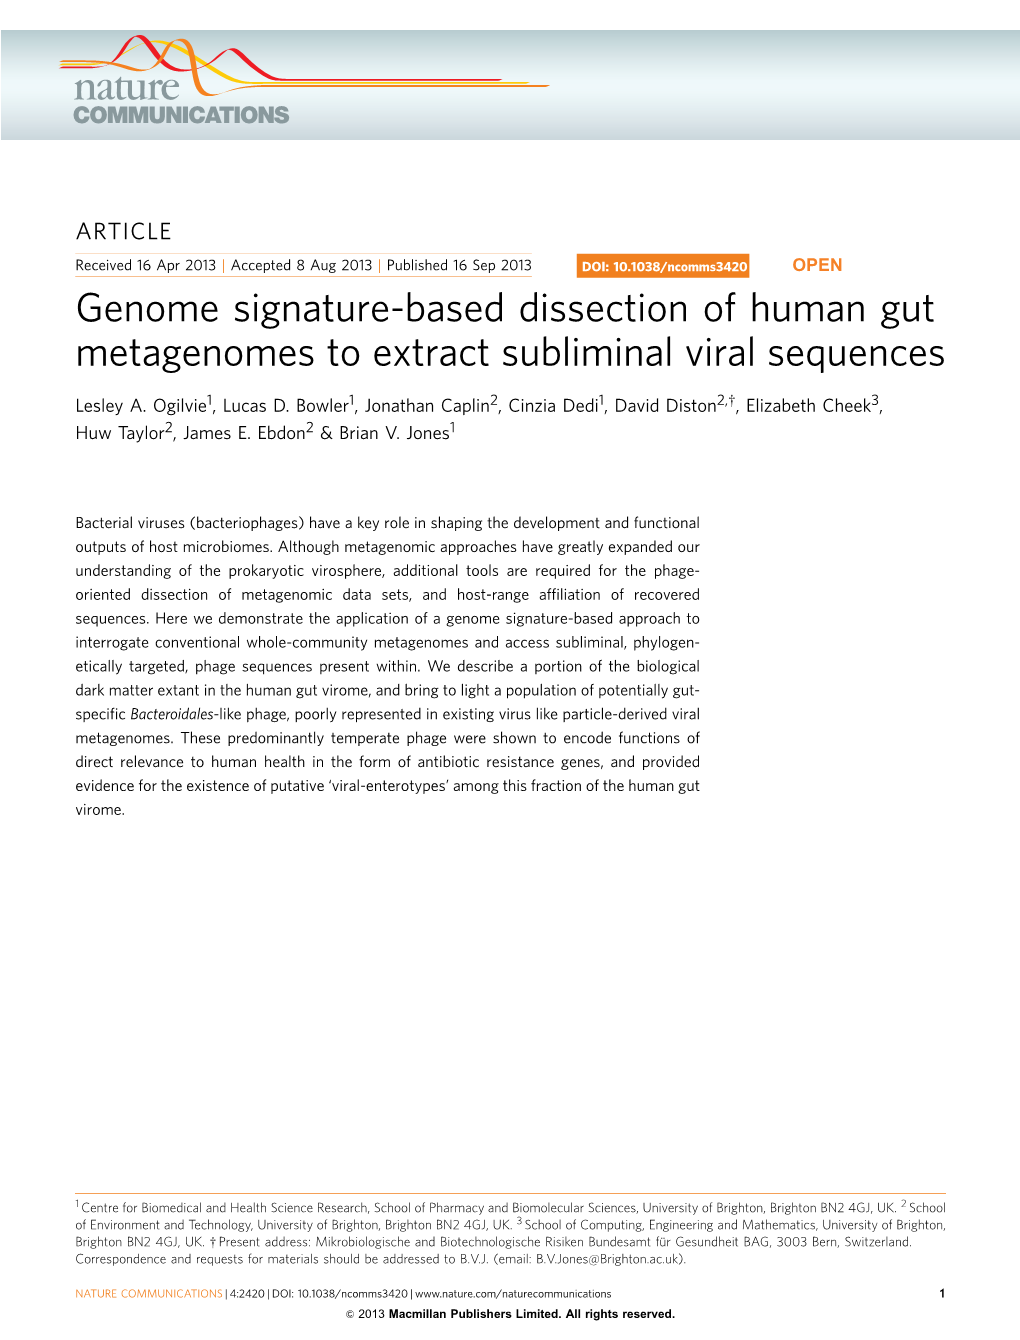 Genome Signature-Based Dissection of Human Gut Metagenomes to Extract Subliminal Viral Sequences